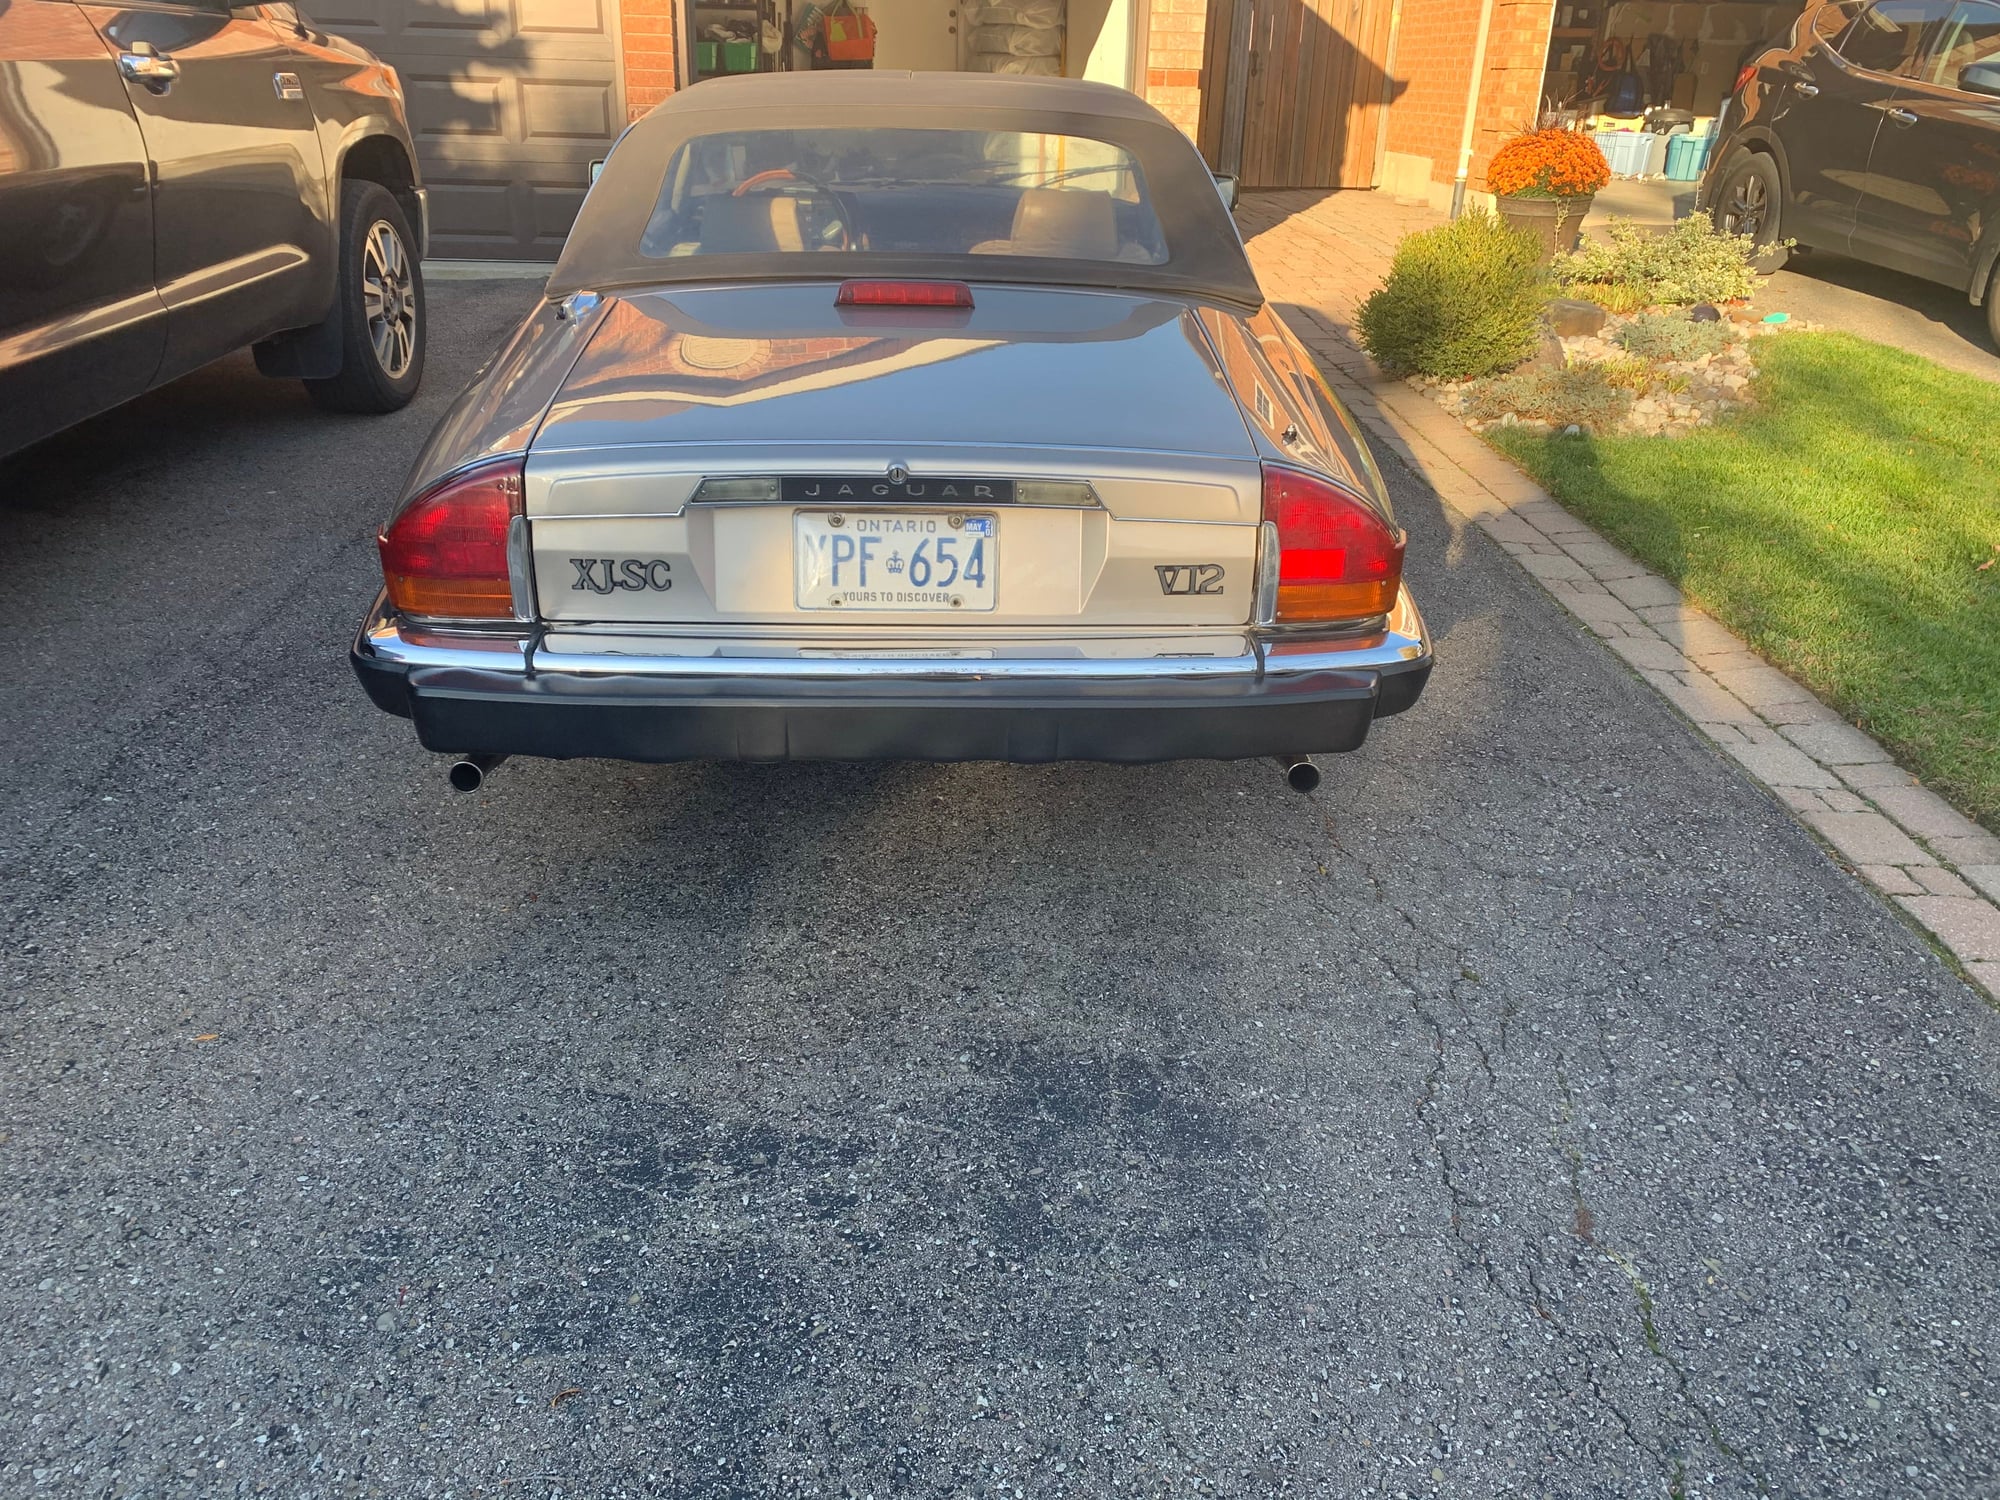 1987 Jaguar XJS - 1987 XJSC great condition with low KM's - Used - VIN SAJNL3047HC139409 - 123,000 Miles - 12 cyl - Georgetown, ON L7G5W6, Canada